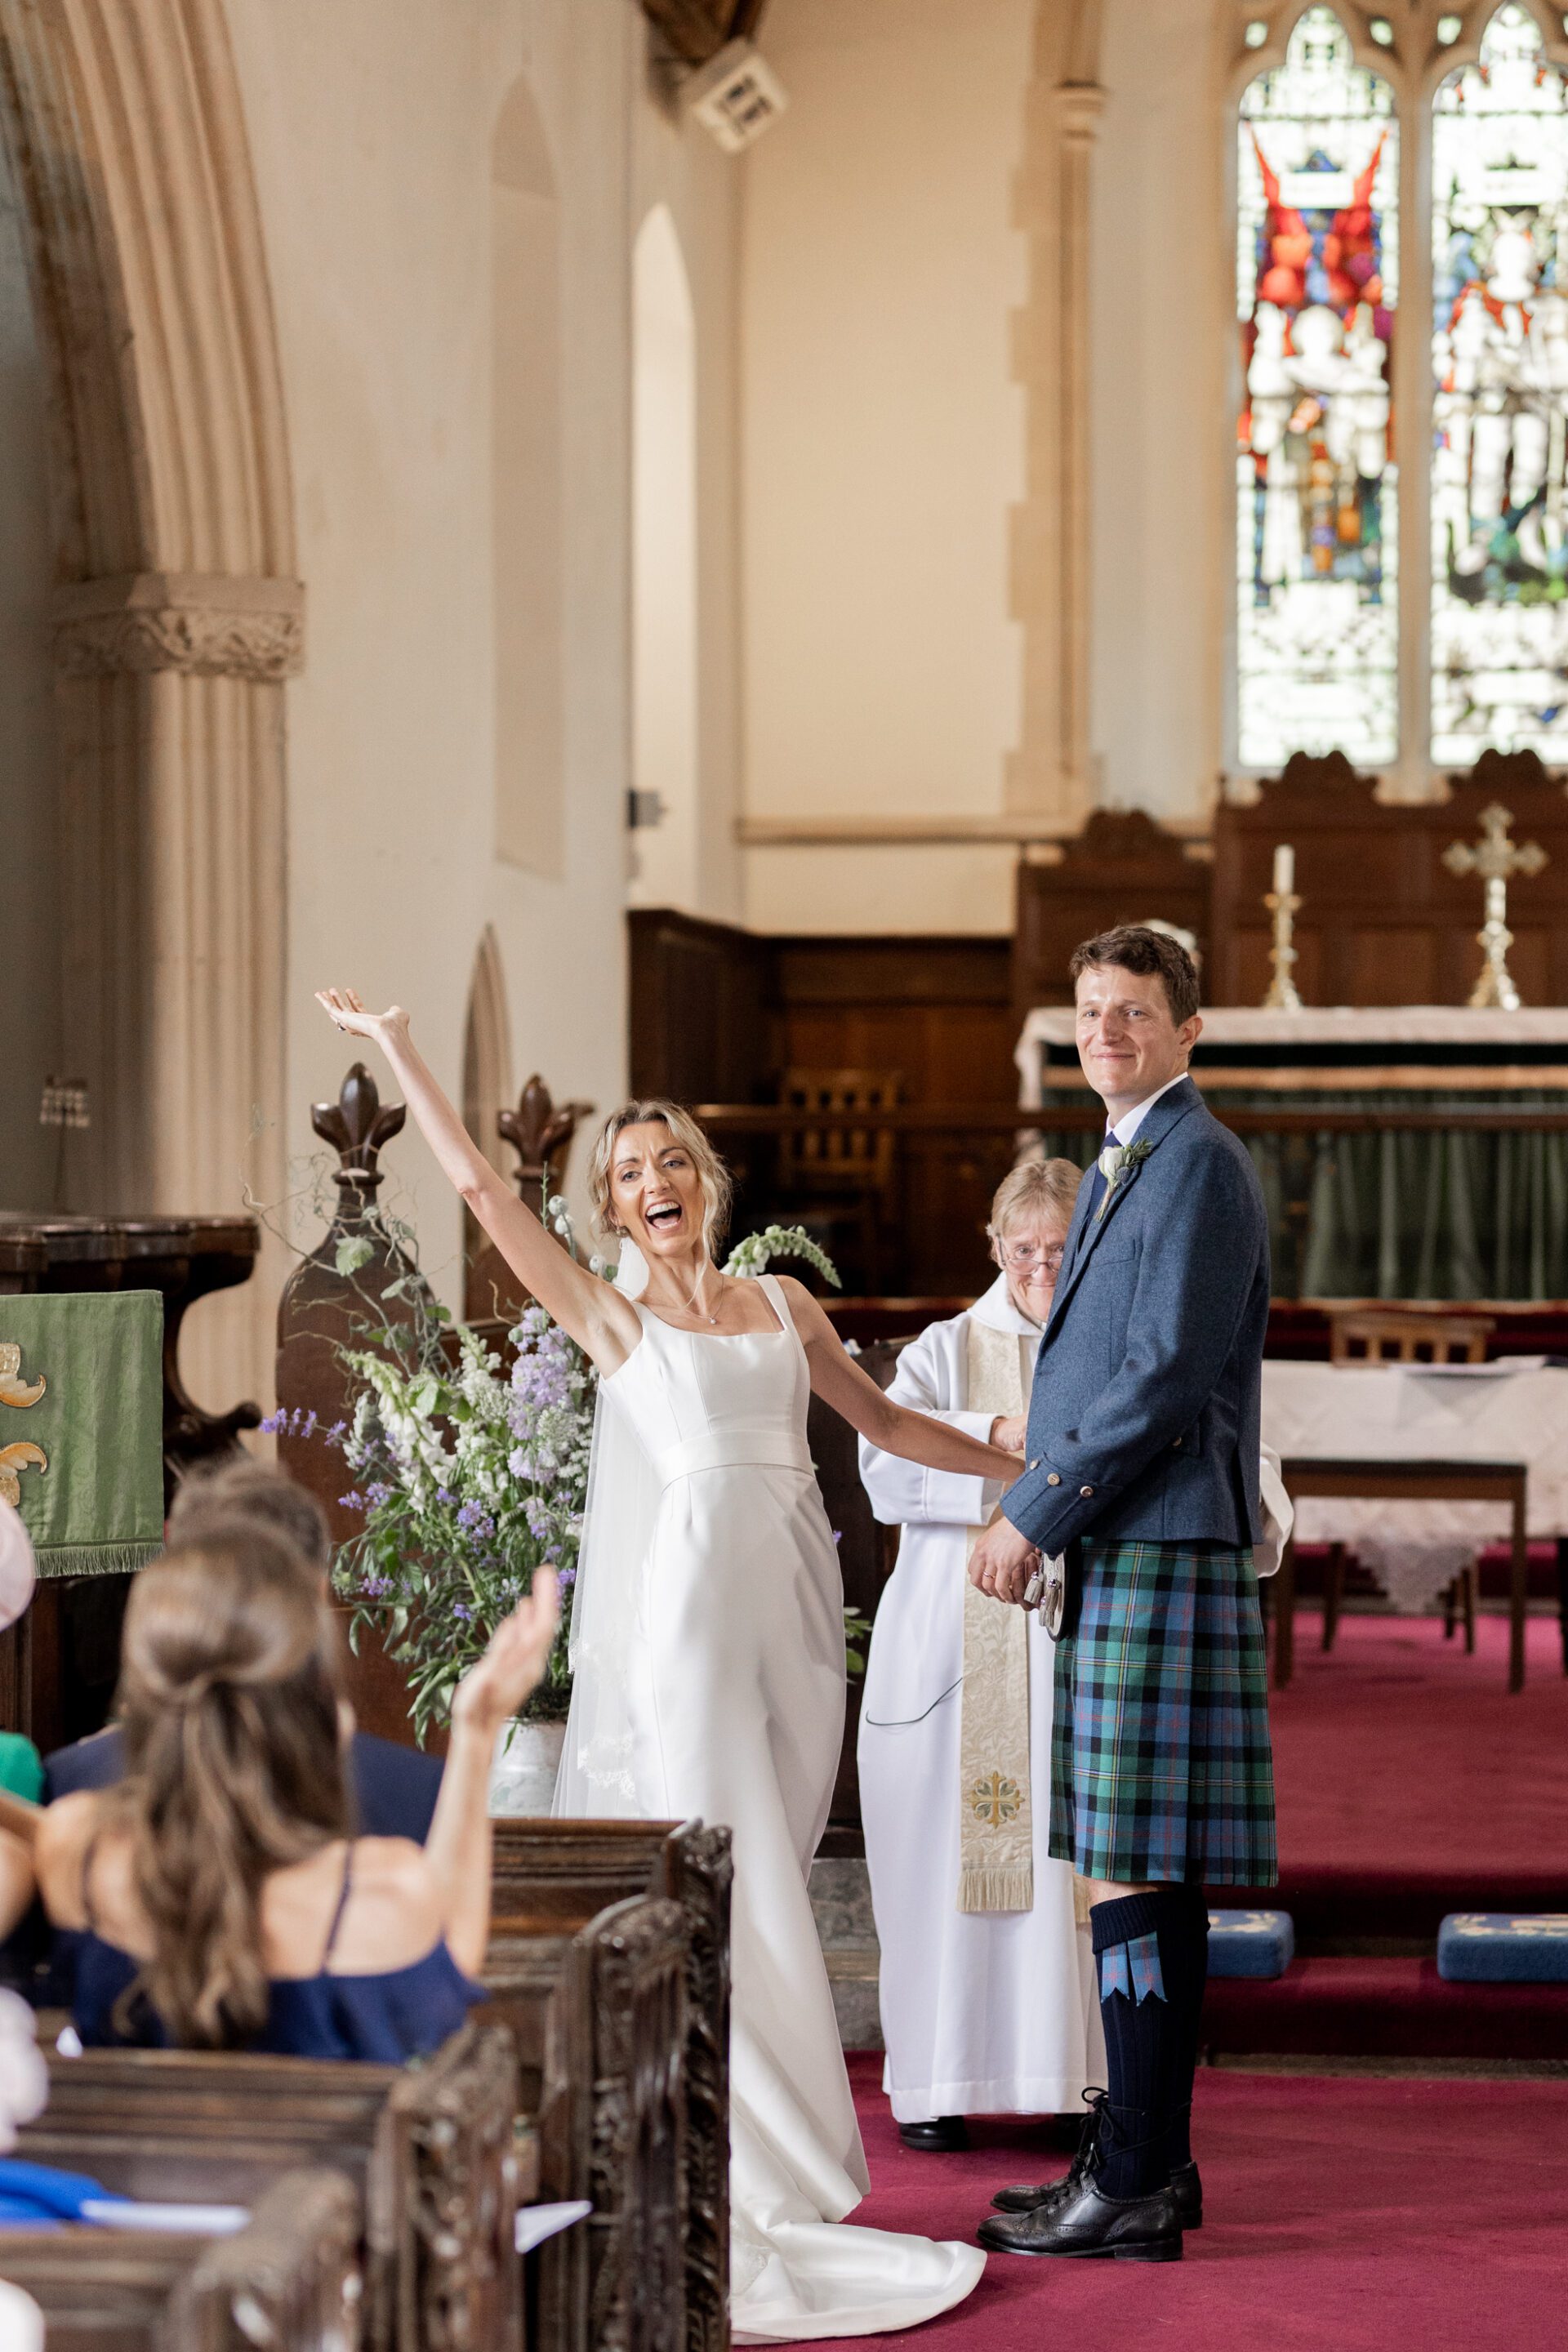 The bride and groom celebrate at their Devon church wedding ceremony